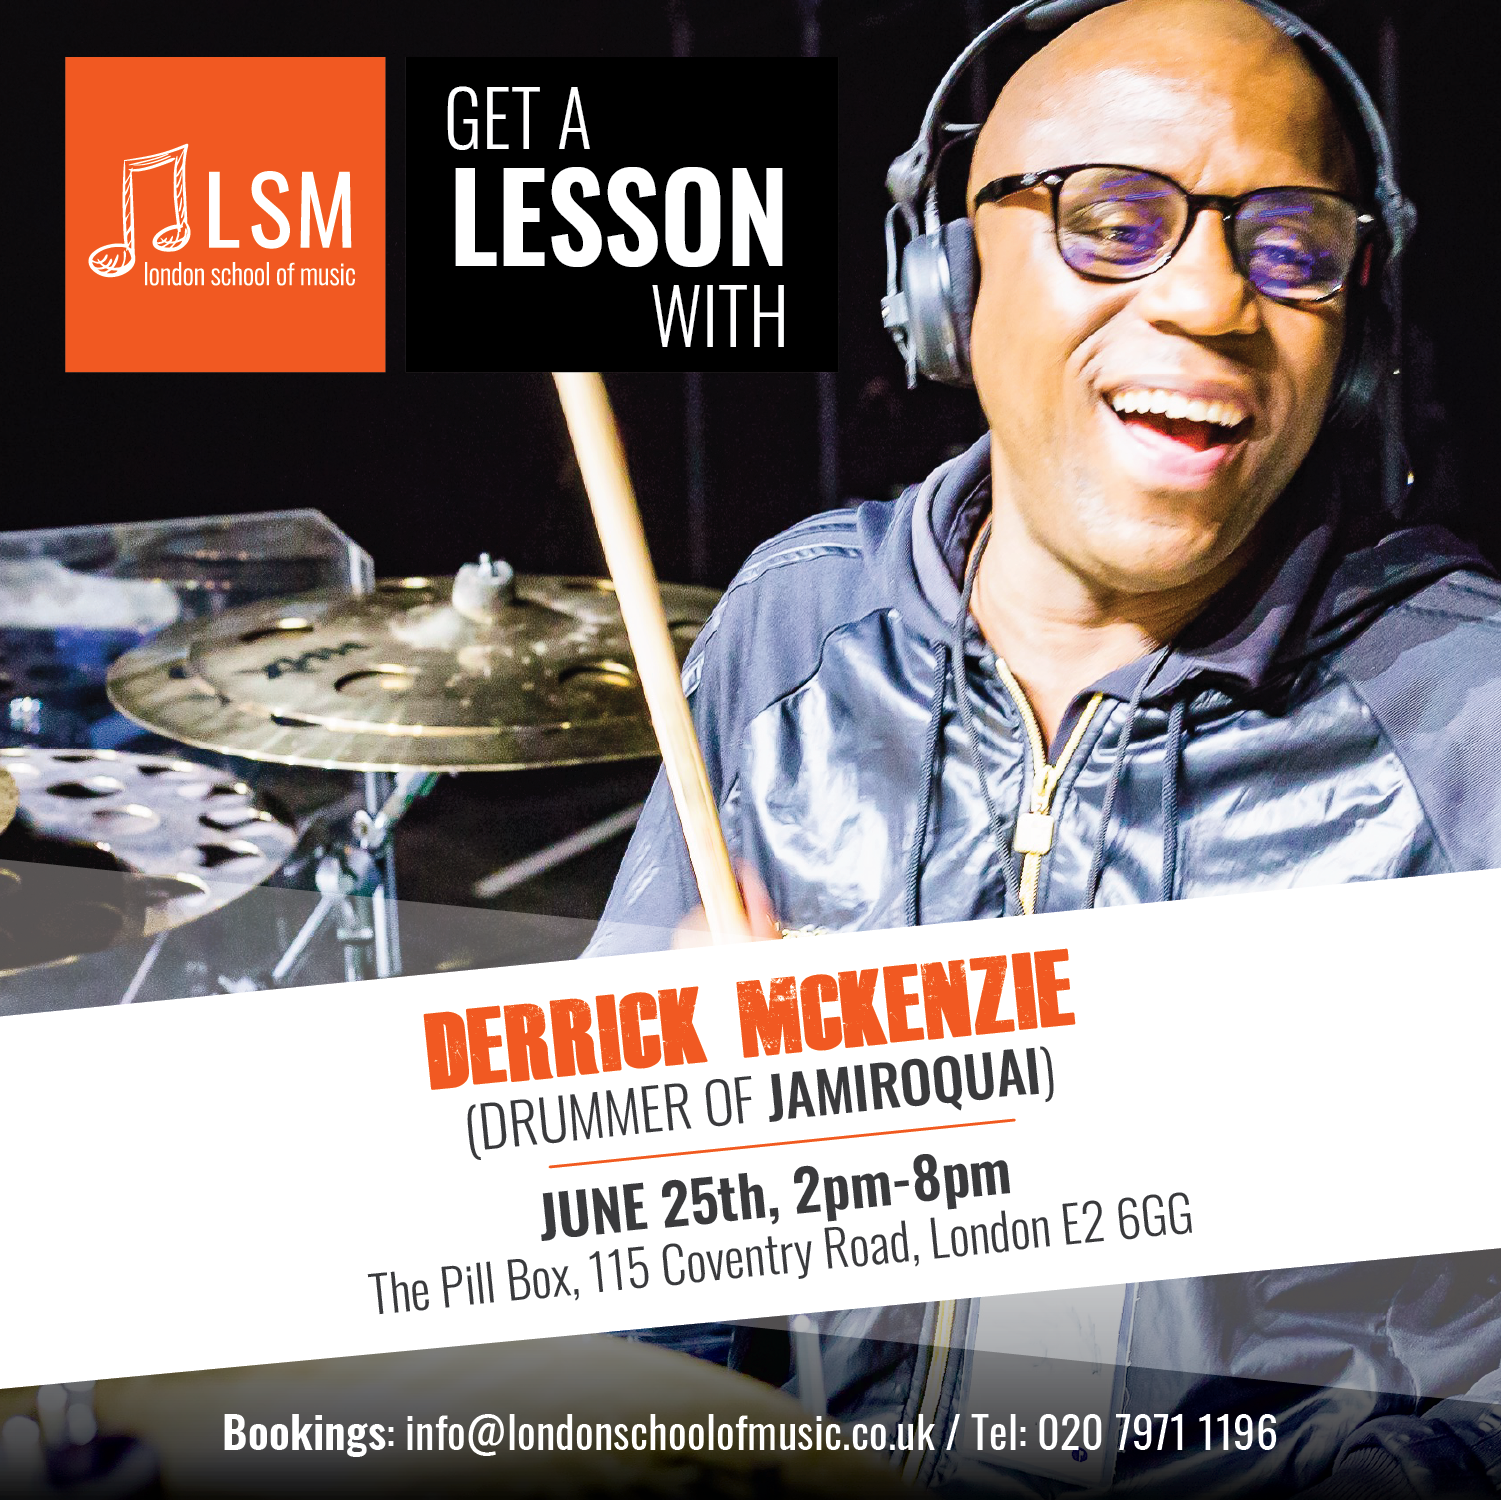 Derrick Mckenzie teaches drumming lessons at the London School of Music